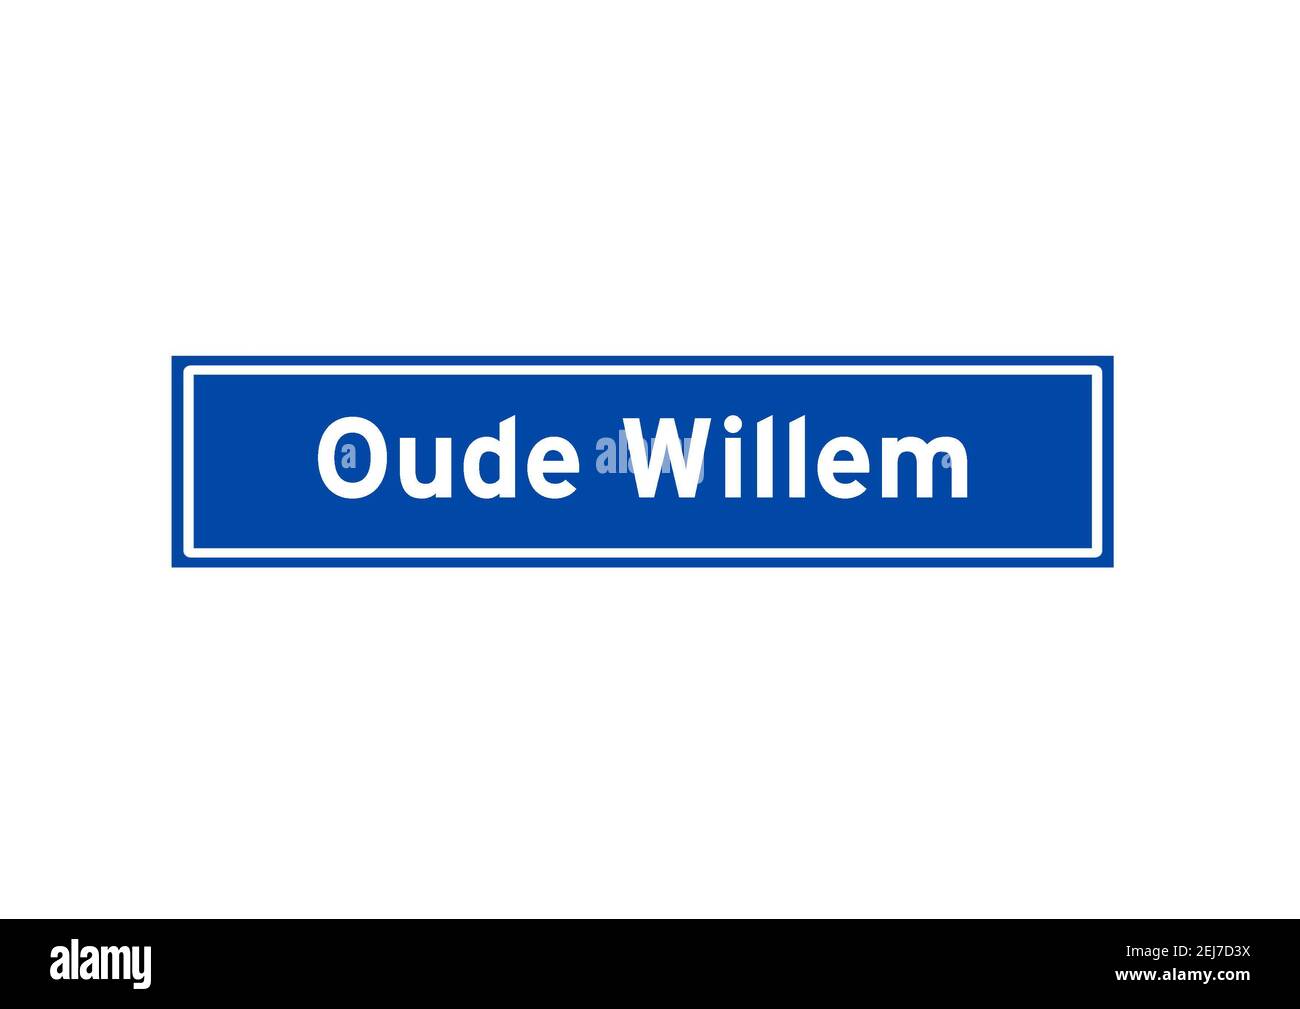 Oude Willem isolated Dutch place name sign. City sign from the Netherlands. Stock Photo